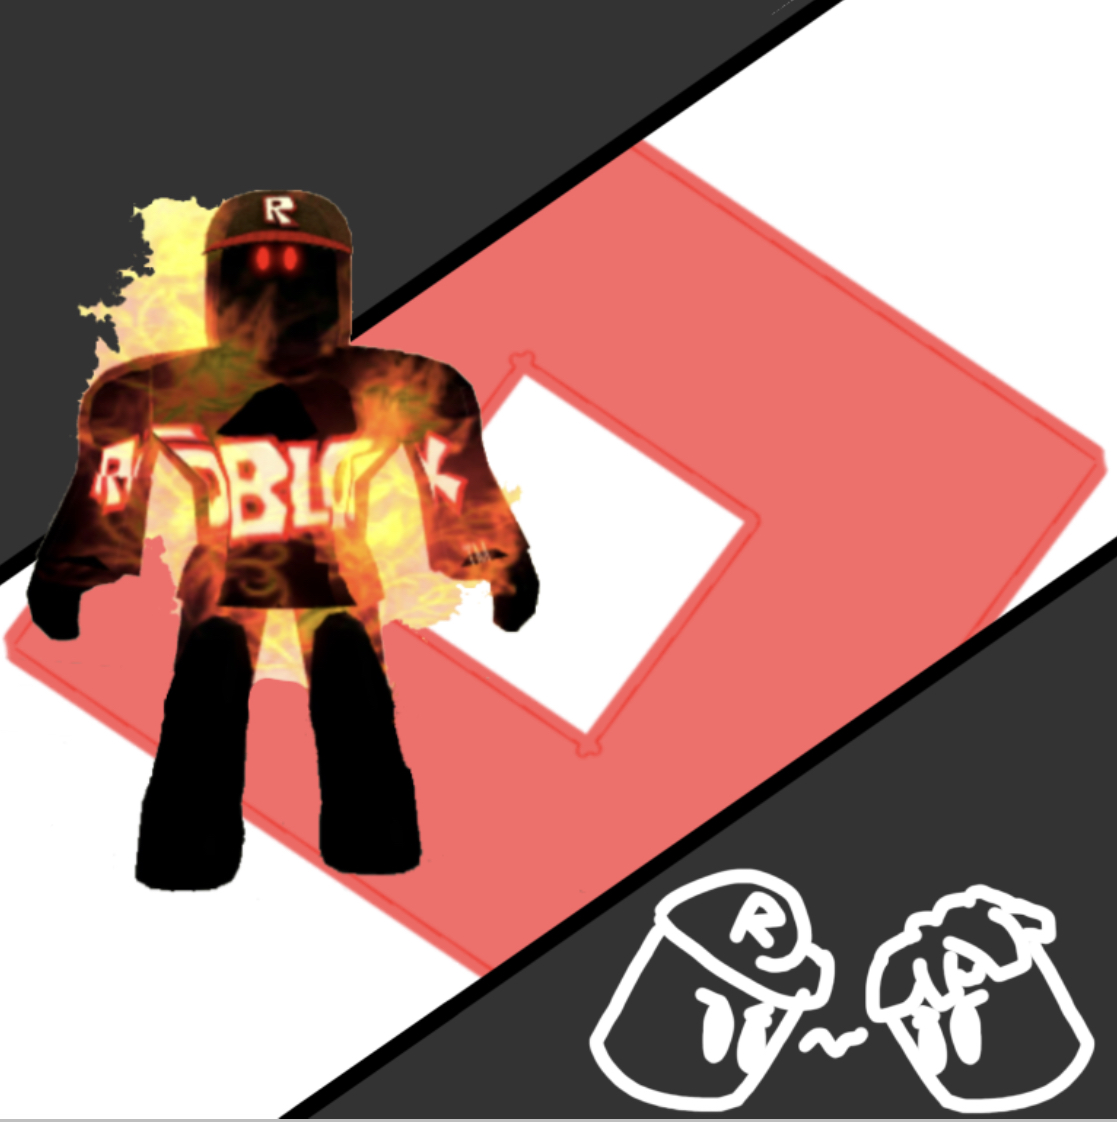 You Played Guest 666 vs Super Guest! - Roblox